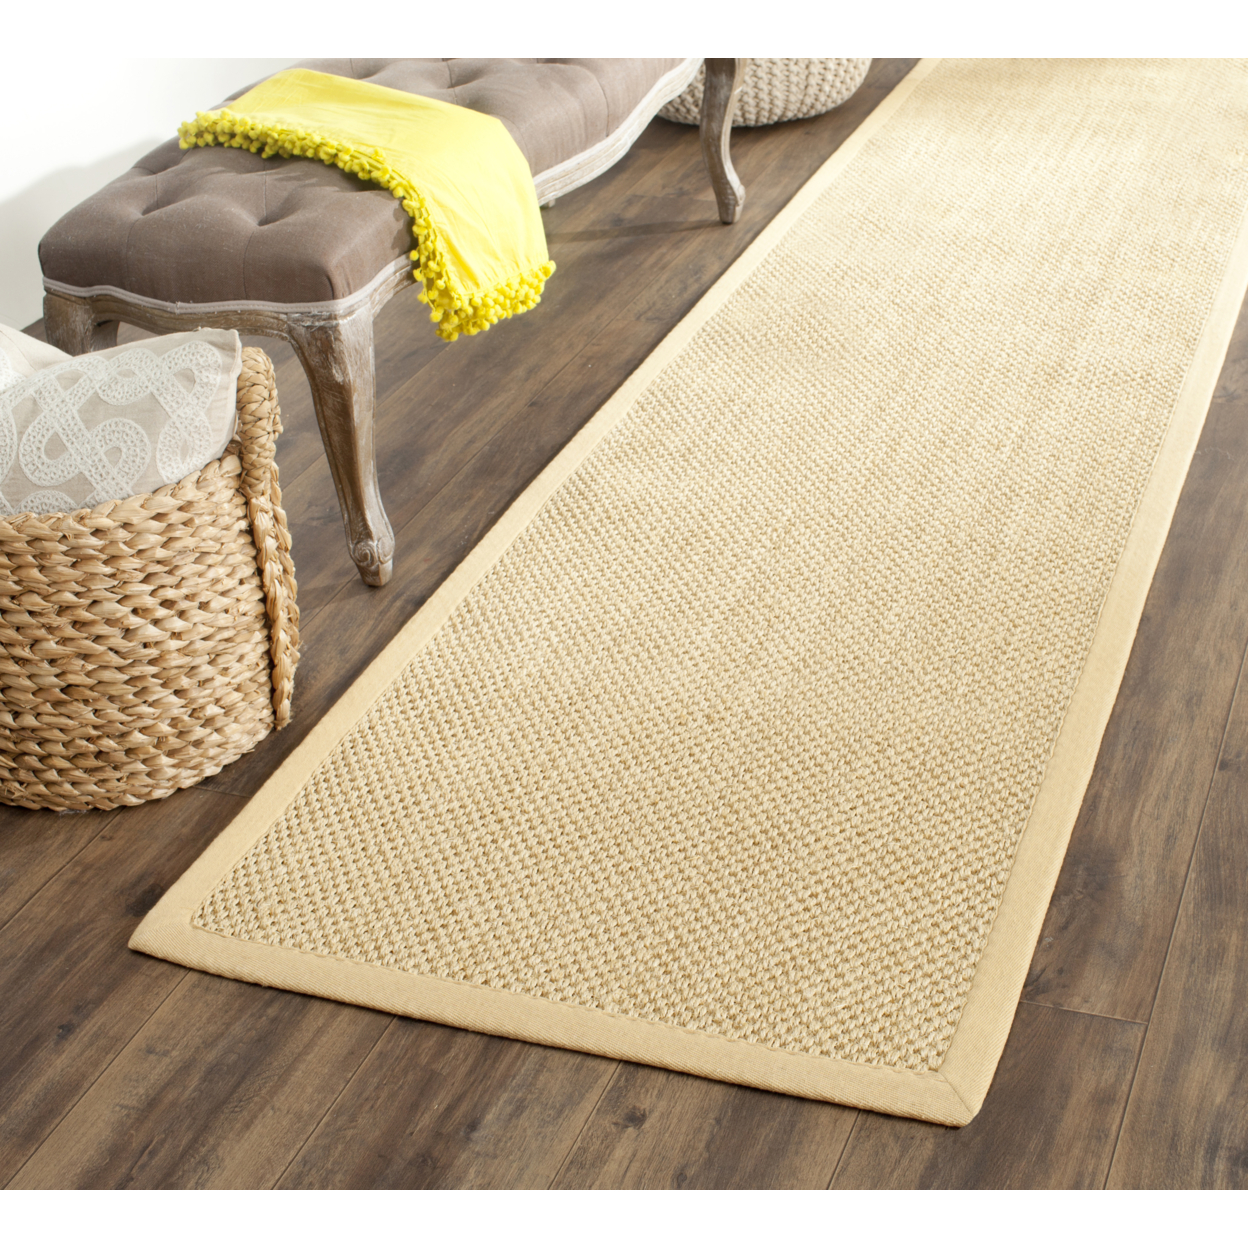 SAFAVIEH Natural Fiber Collection NF443A Maize/Wheat Rug - 2' 6 X 14'